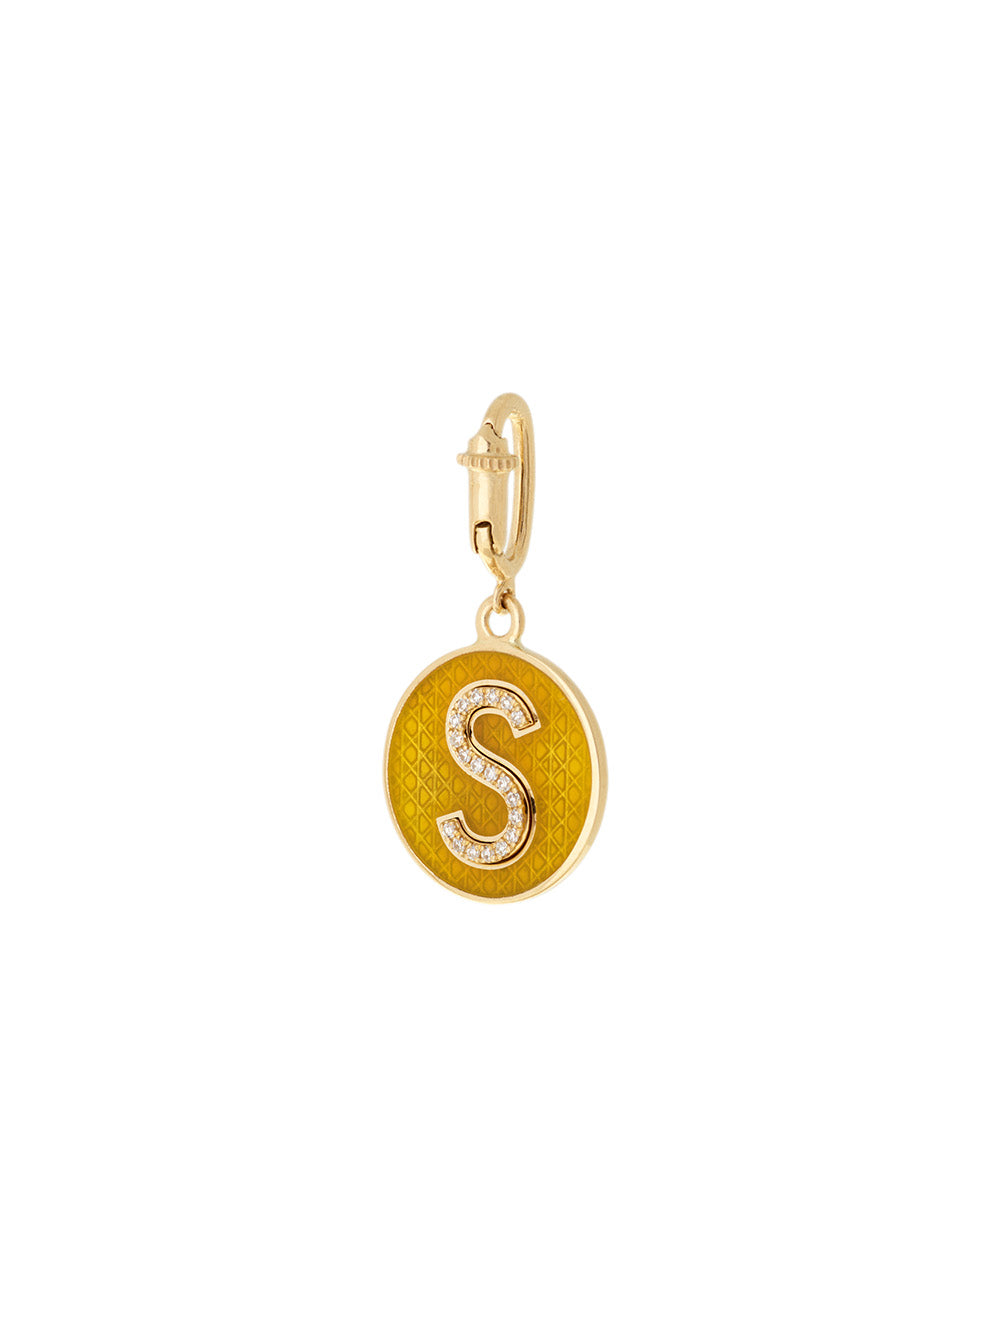 LETTER S YELLOW GOODS, DIAMONDS AND YELLOW EMAIL